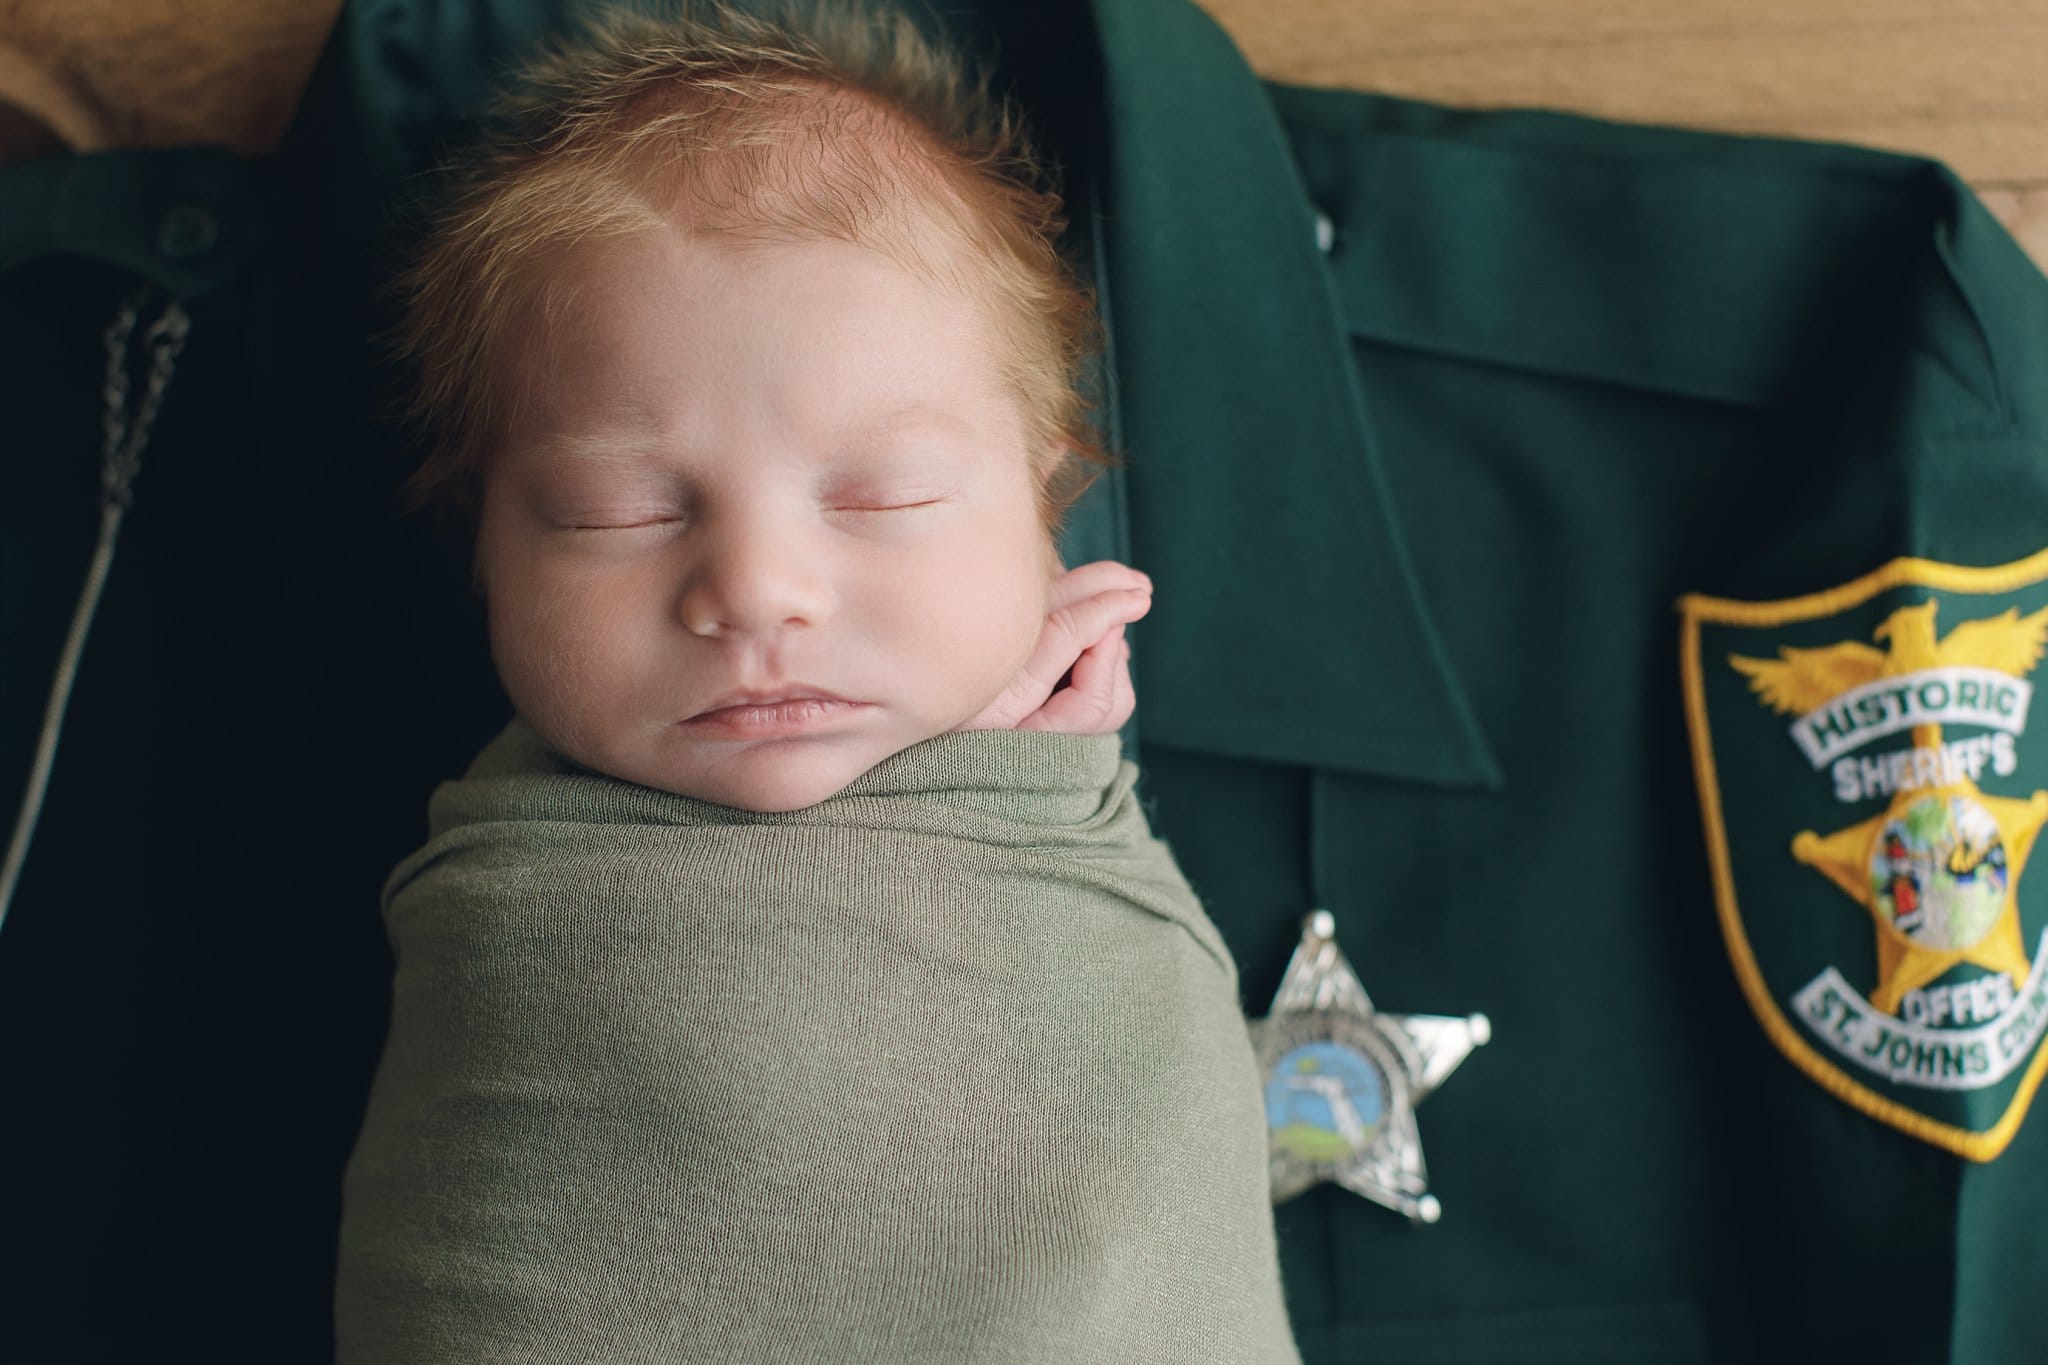 St Johns County Newborn Photographer baby boy with fuzzy hair swaddled and on top of daddy's uniform